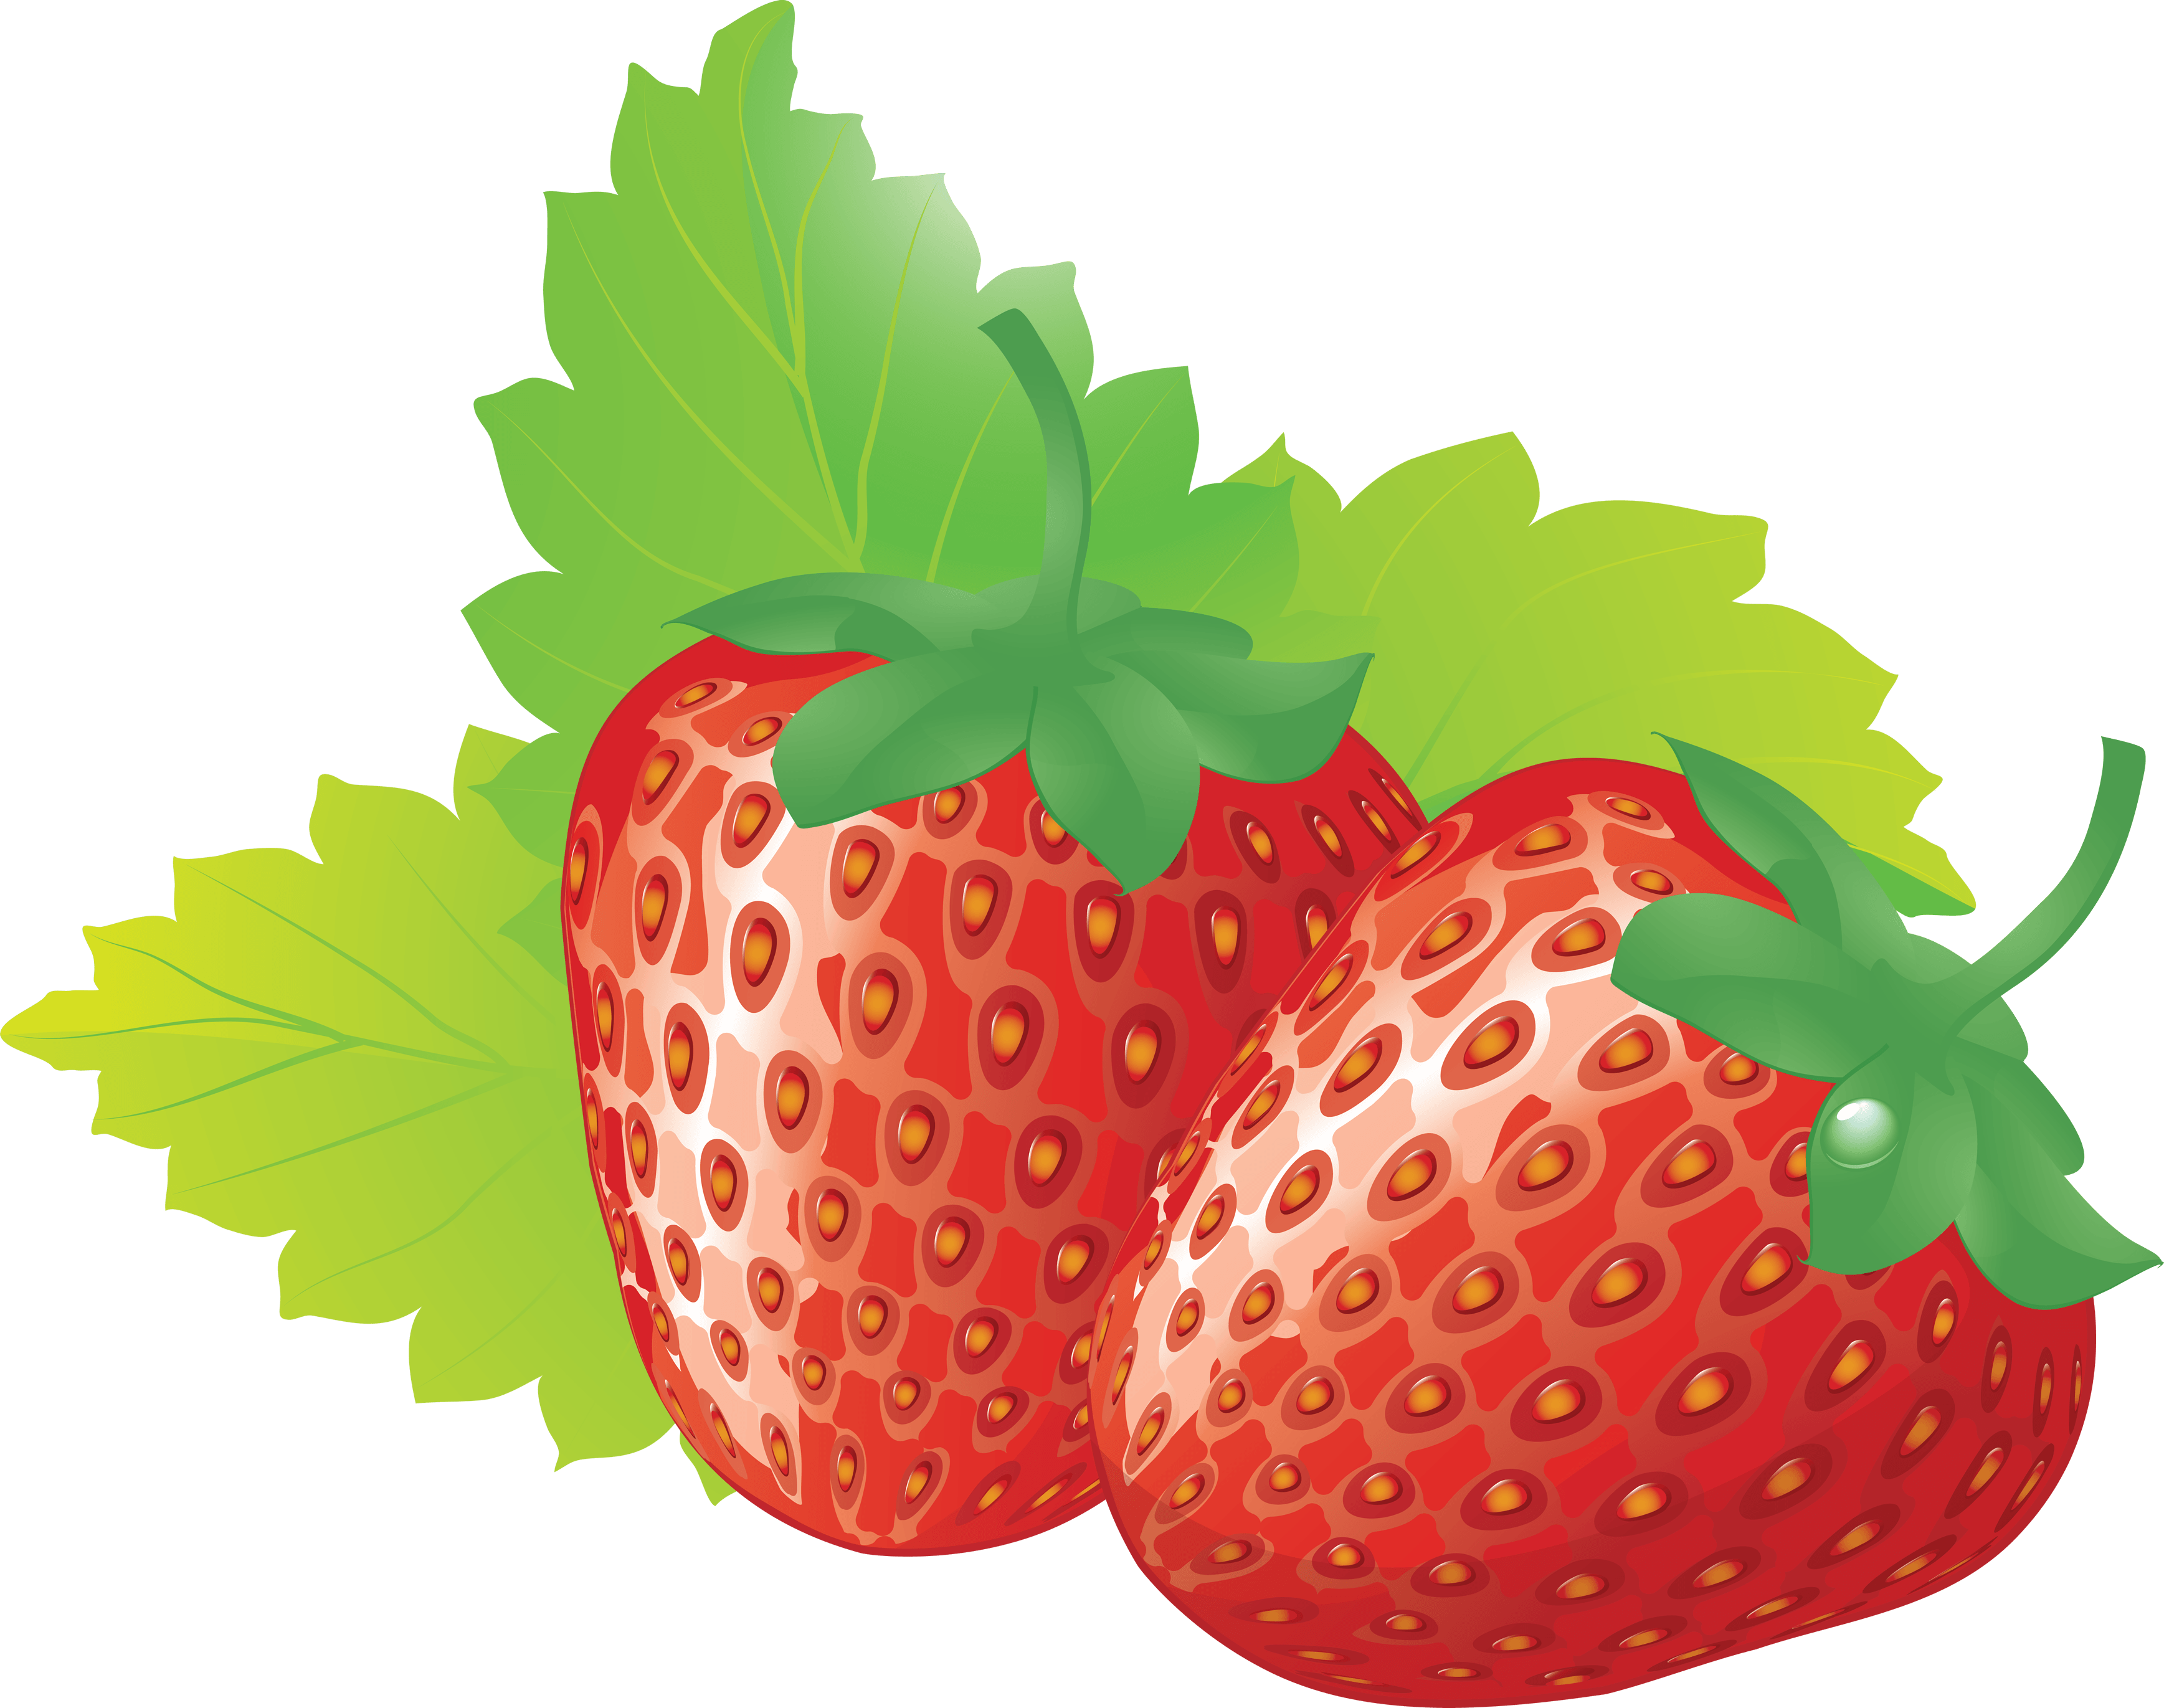 Strawberry leaf cliparts free. Strawberries clipart coloring